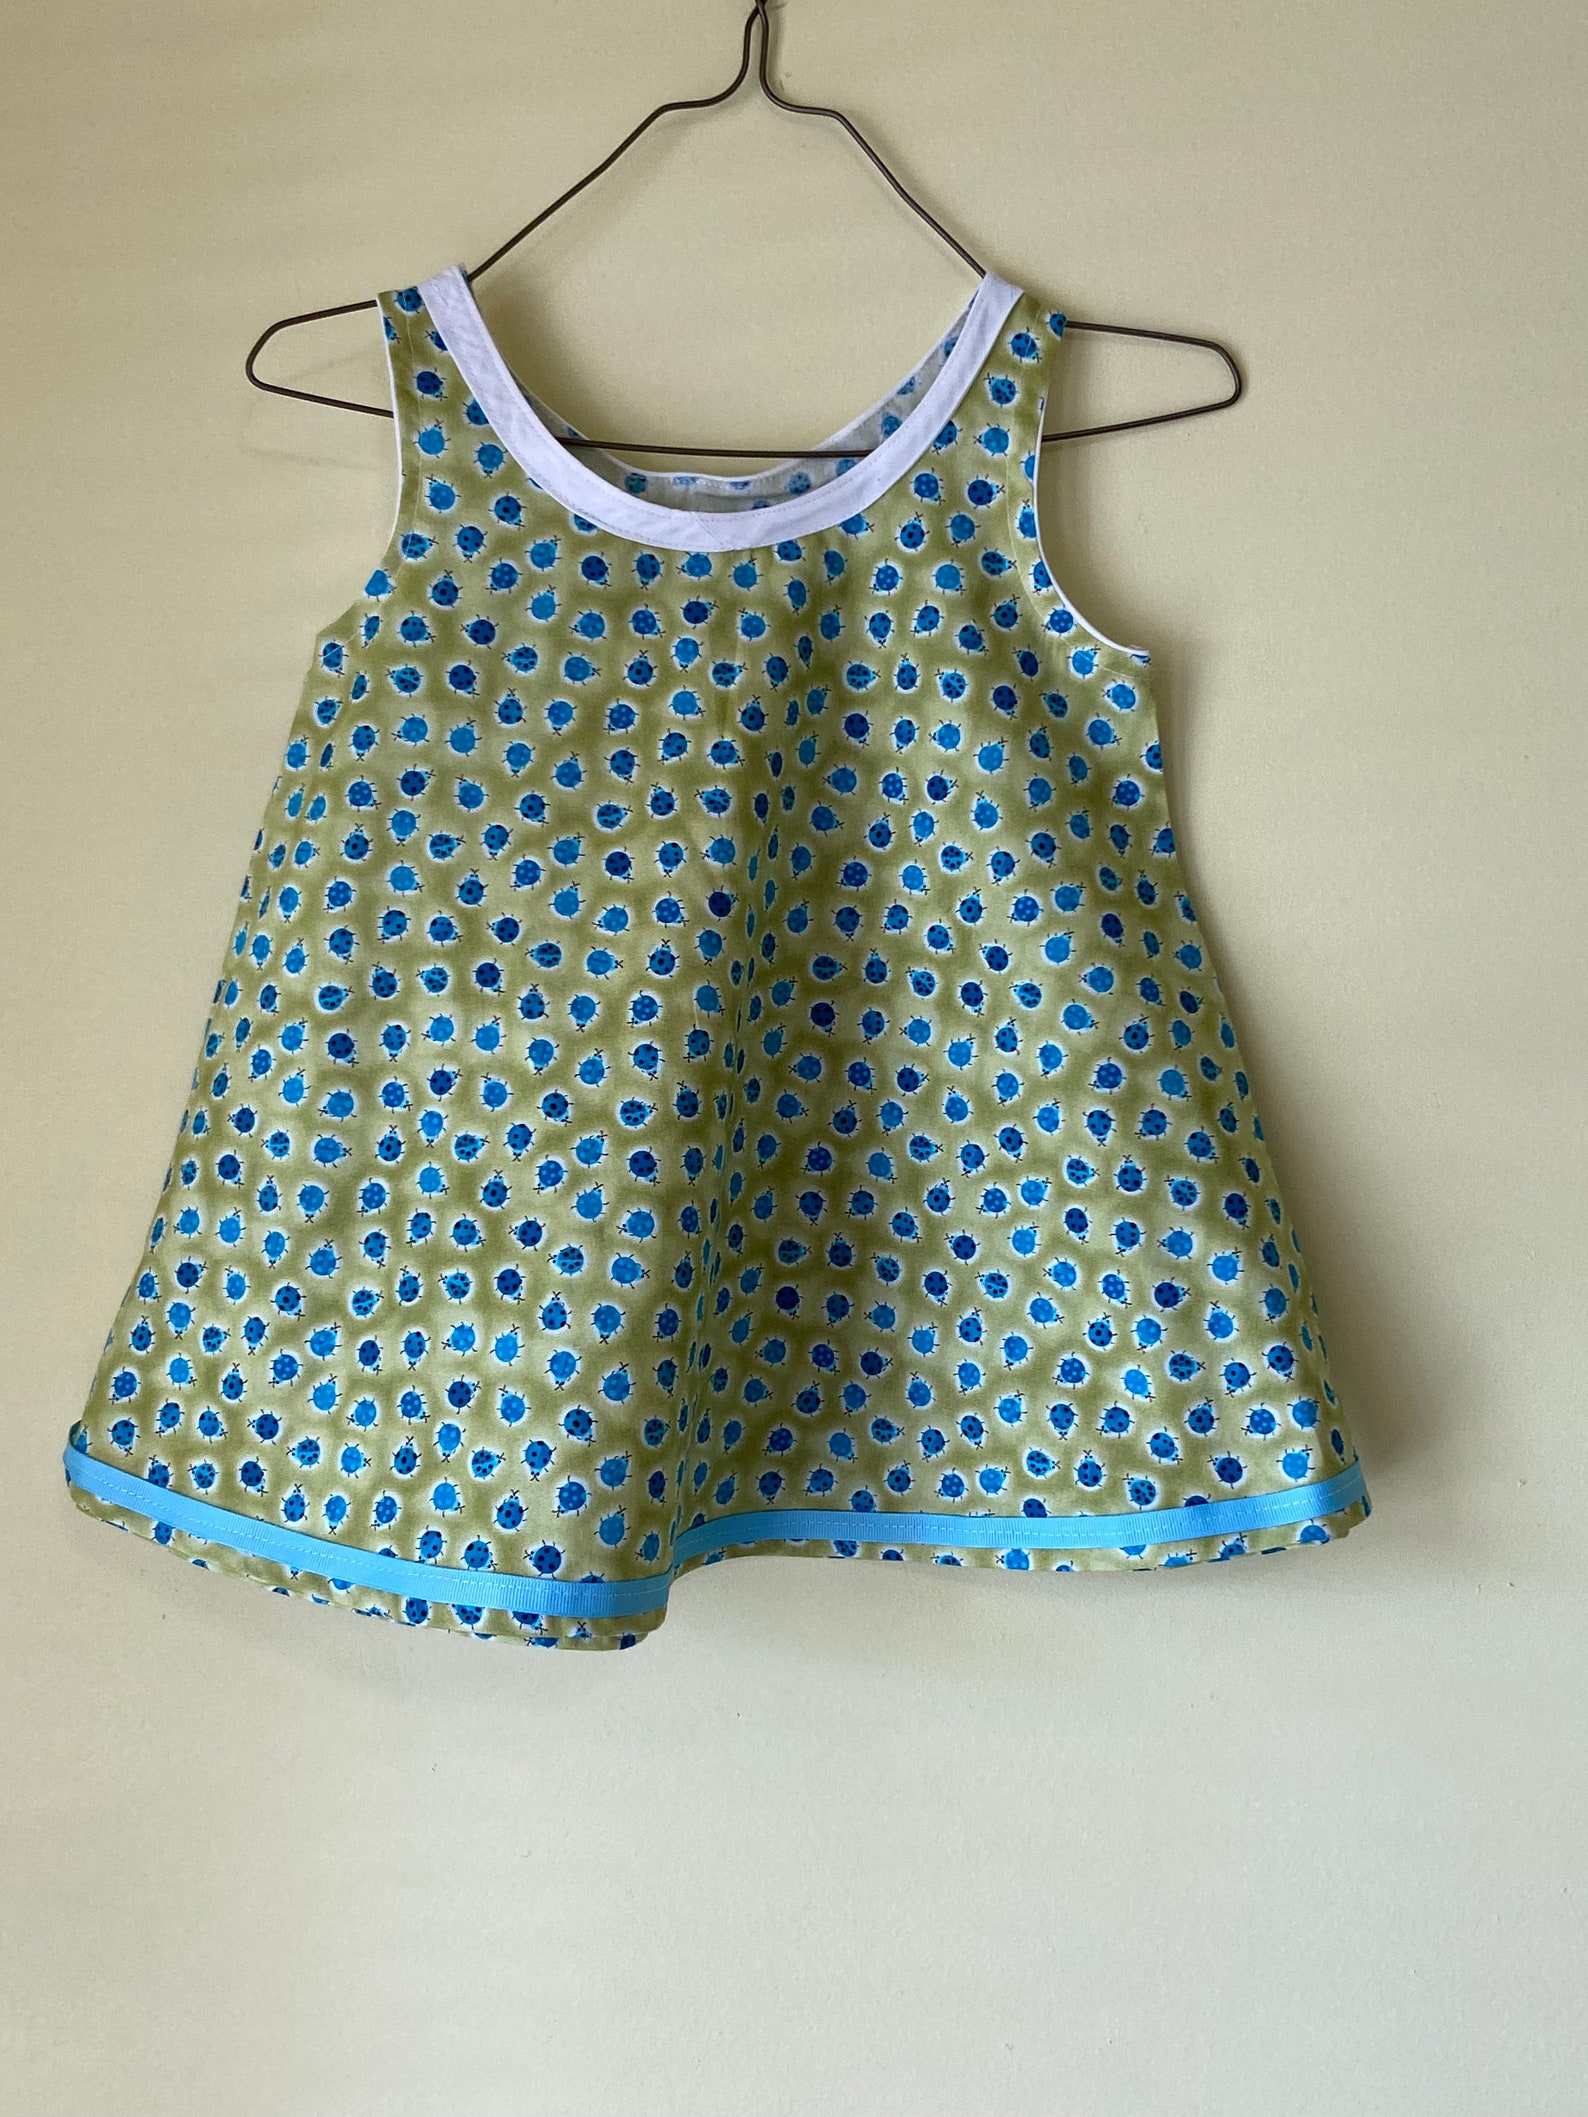 Little Girls Sundress With Matching Panties - Etsy